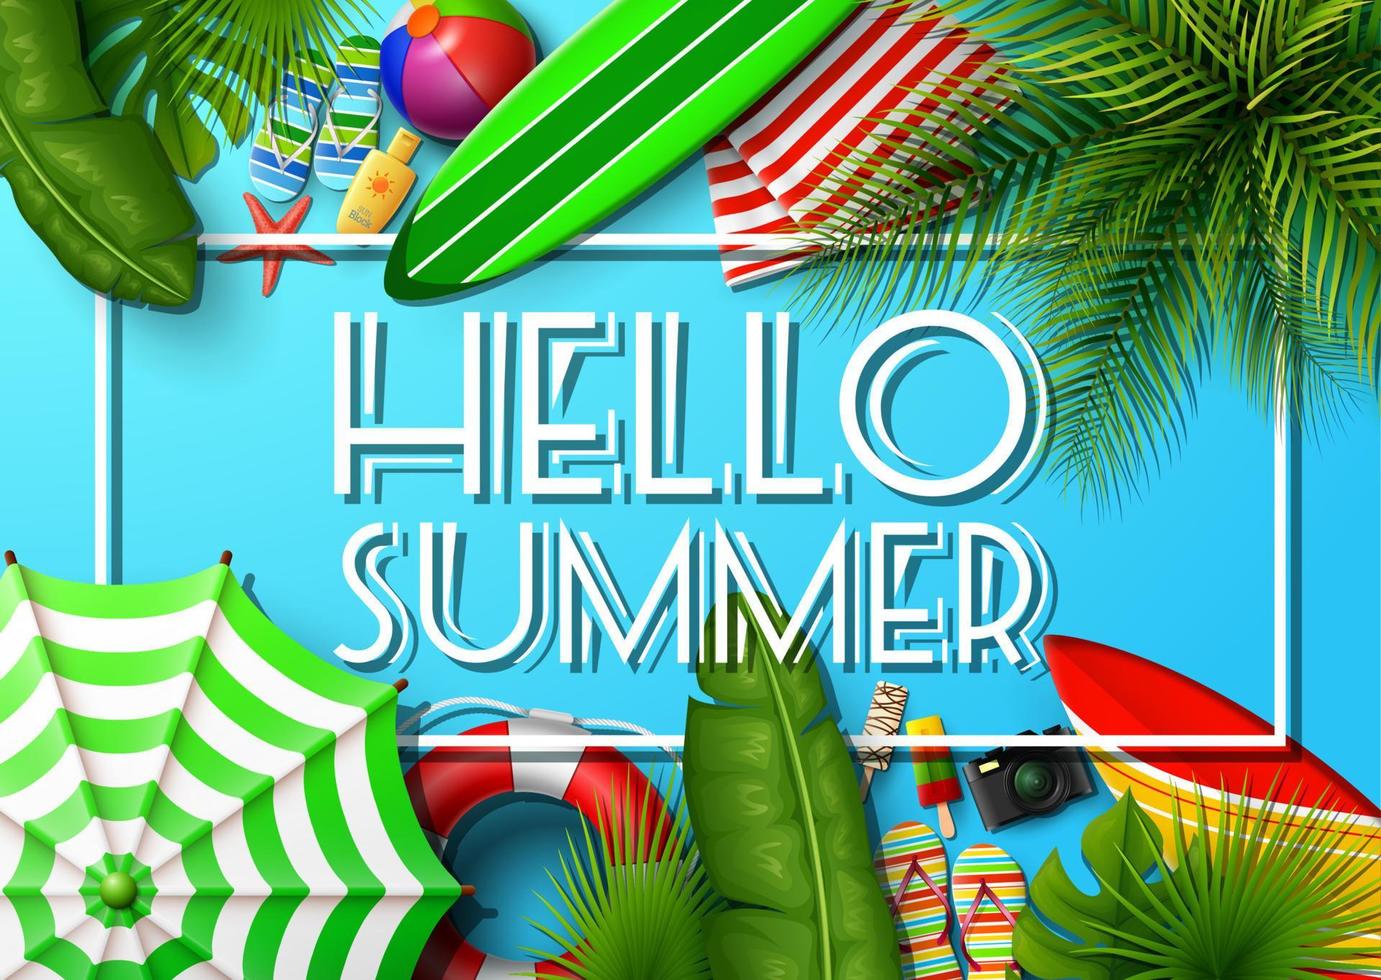 Hello summer time holiday banner. Top view of tropical leaves and beach element collections on sand background vector